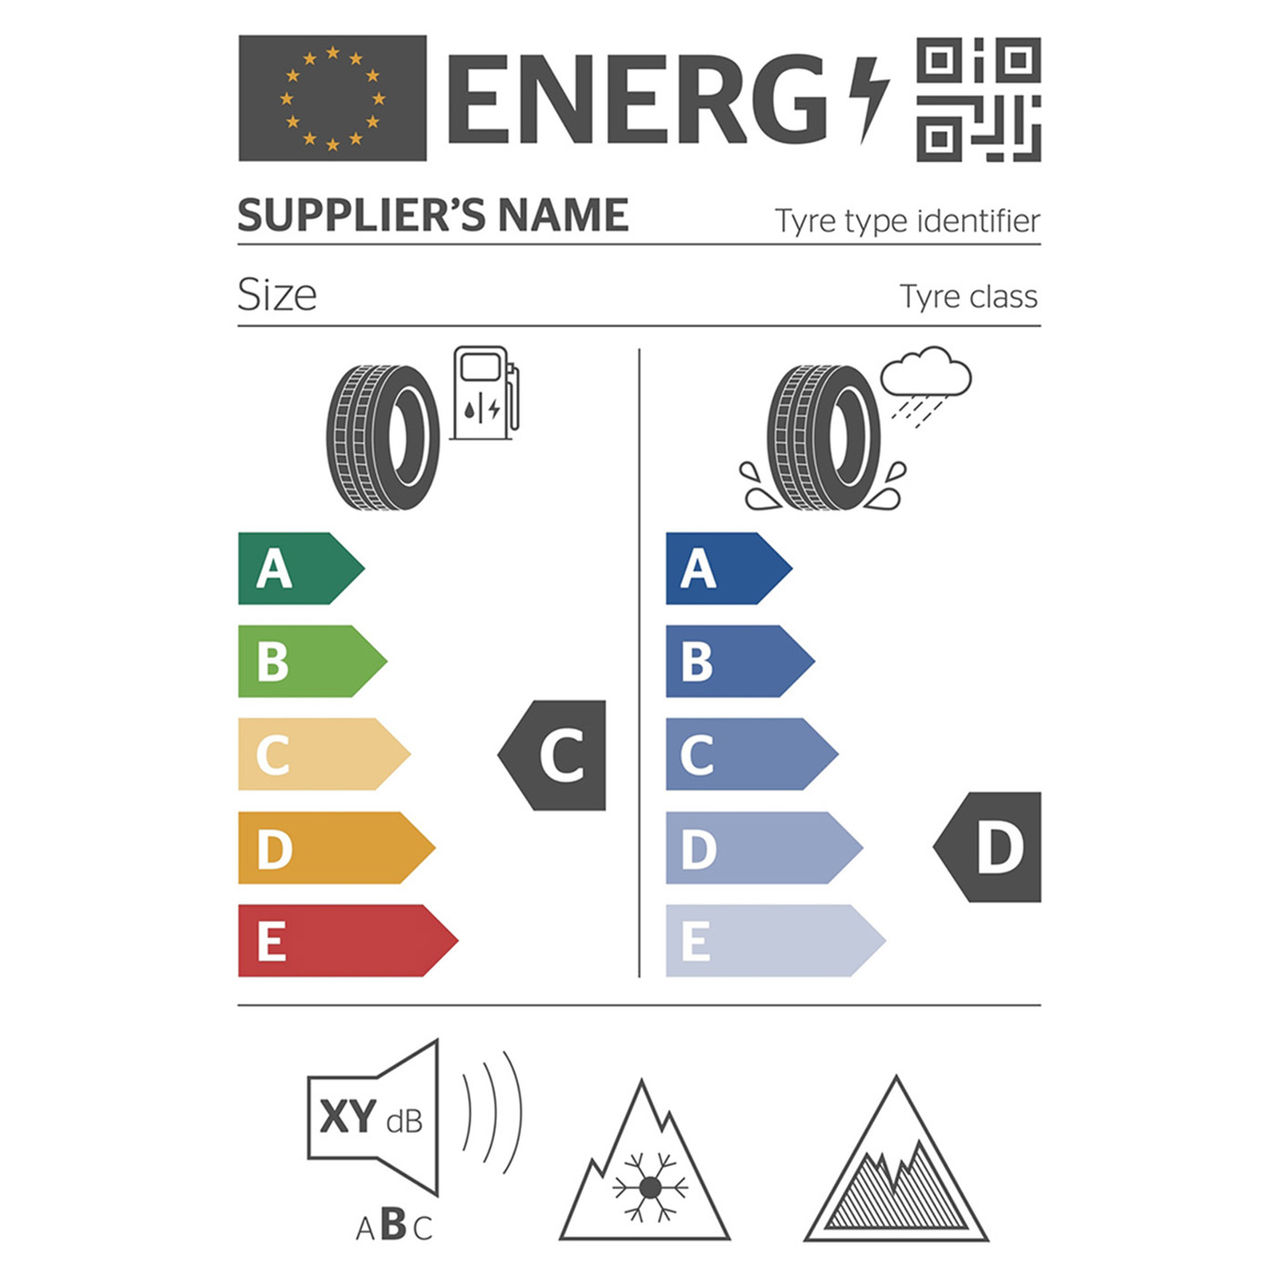 How to read the EU Tyre Label